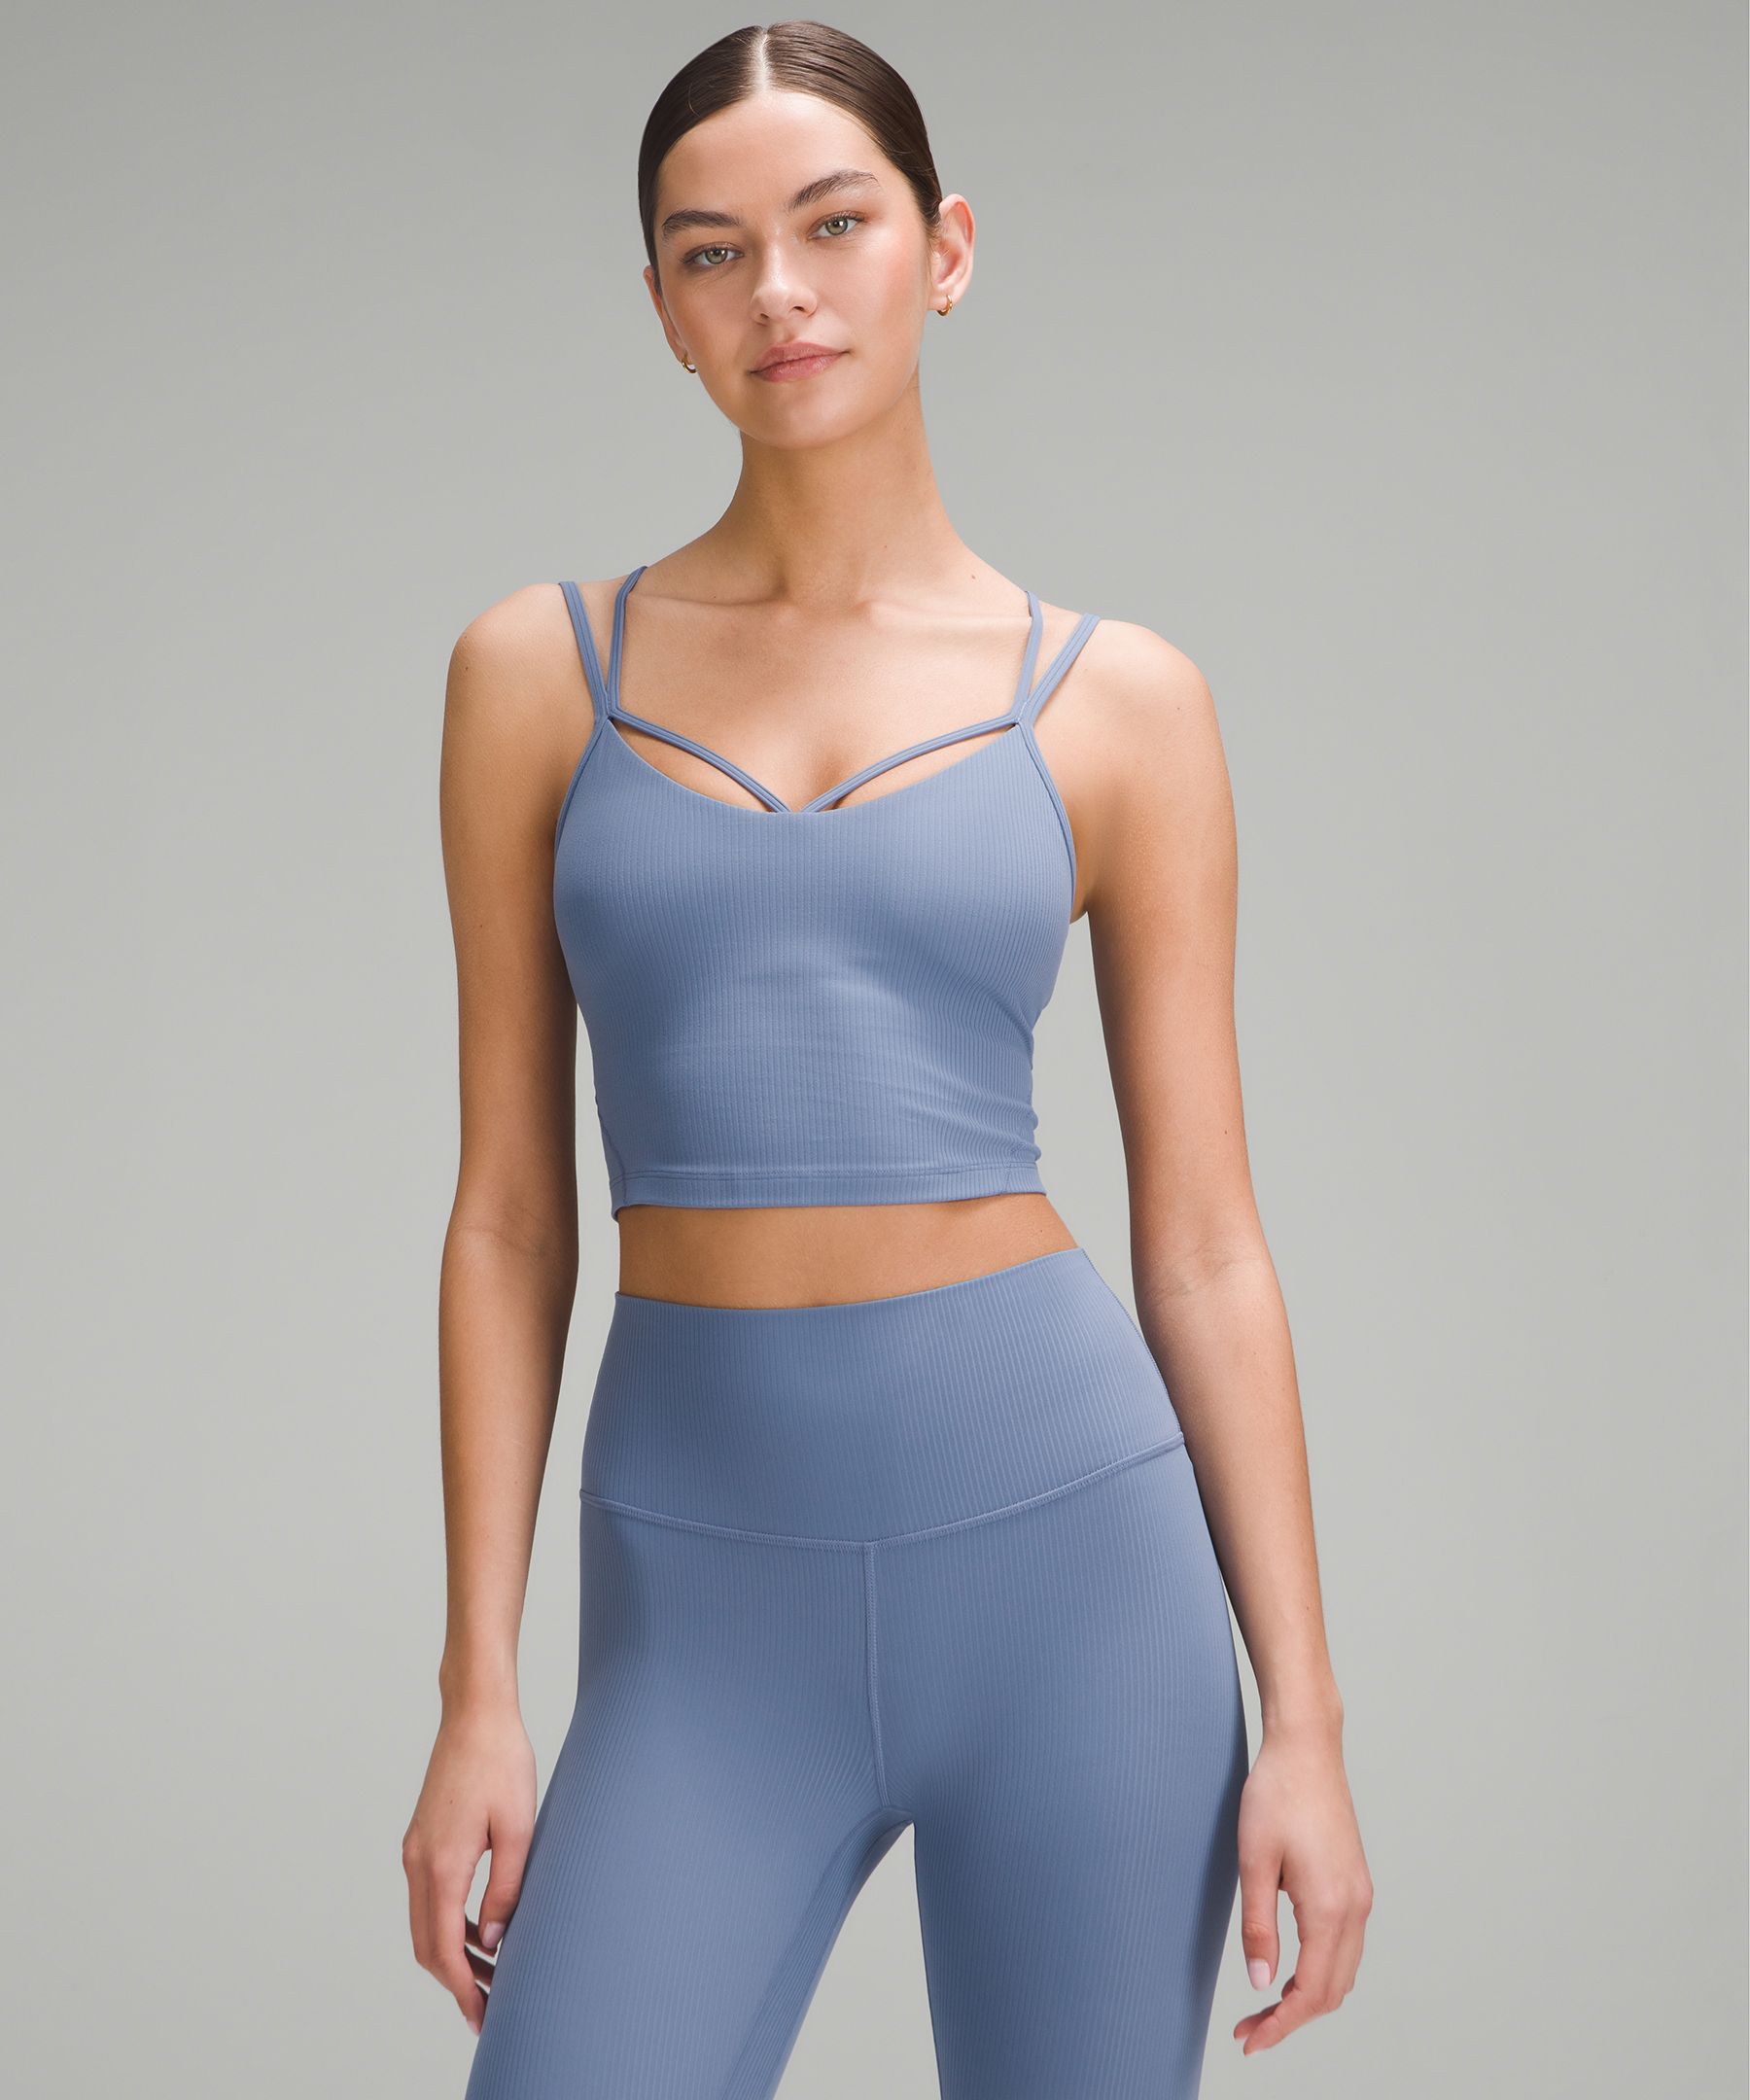 lululemon Align™ Strappy Ribbed Tank Top *Light Support, A/B Cup | Women's Sleeveless & Tops